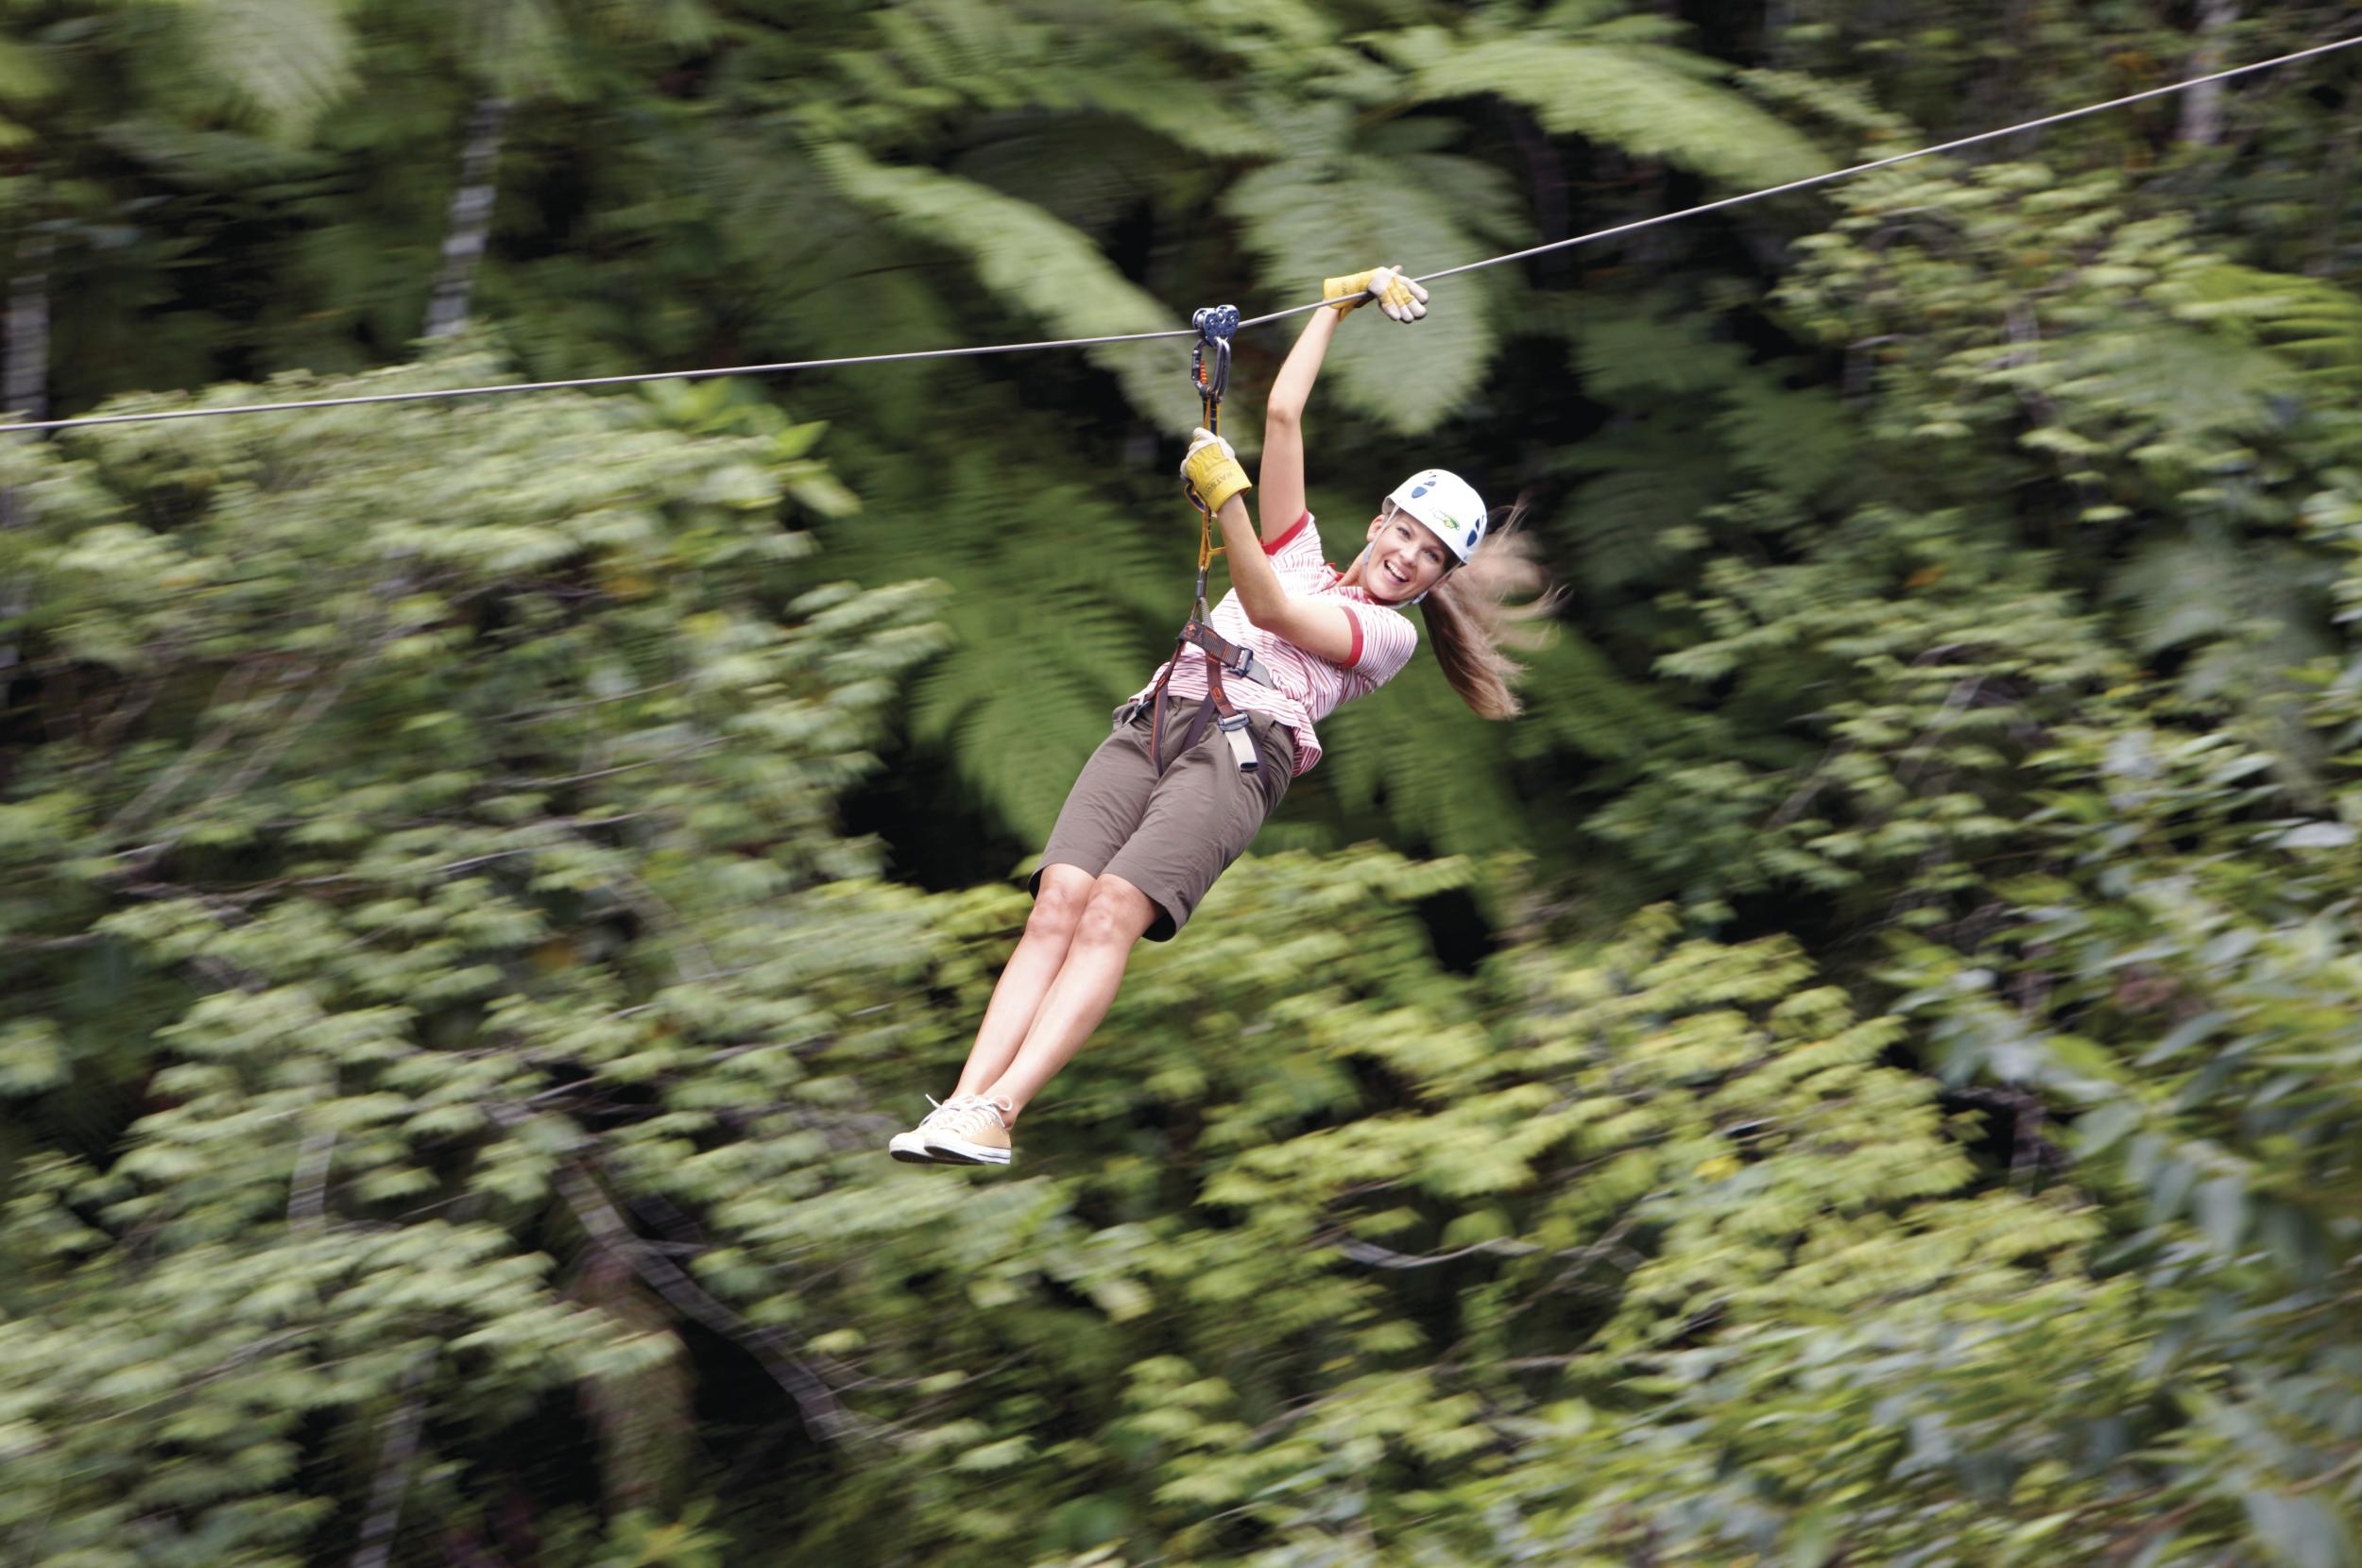 Take on 16 zip lines in a row